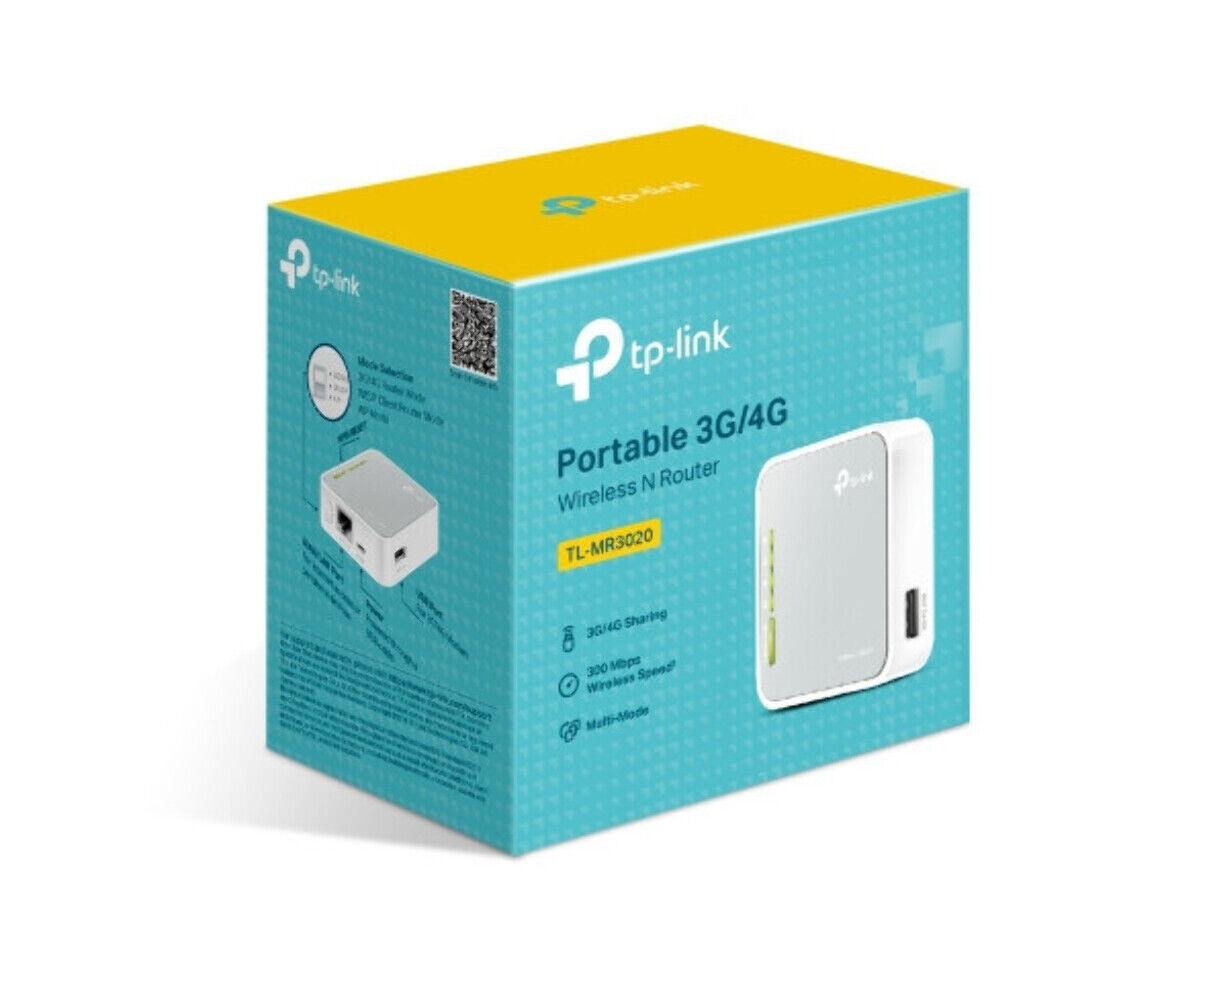 TP-Link TL-MR3020 Portable 3G/4G Wireless N Router 2.4GHz (150Mbps) 802.11bgn 1x